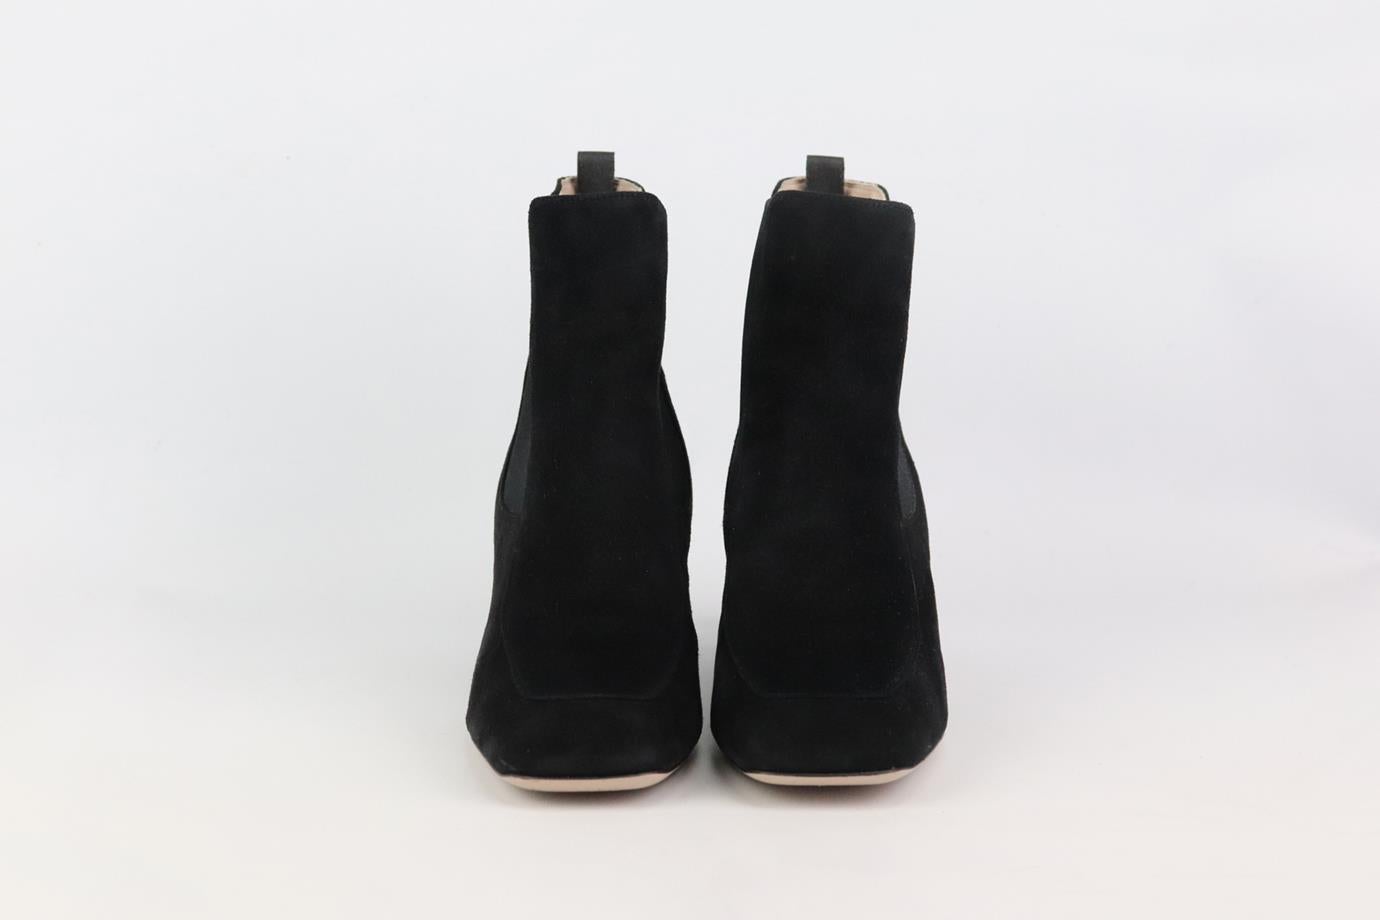 These slick ankle boots by Miu Miu are a must-have for fall, they are made from suede with a block heel embellished with signature gleaming crystals. Heel measures approximately 60 mm/ 2.4 inches. Black suede. Pull on. Does not come with box or